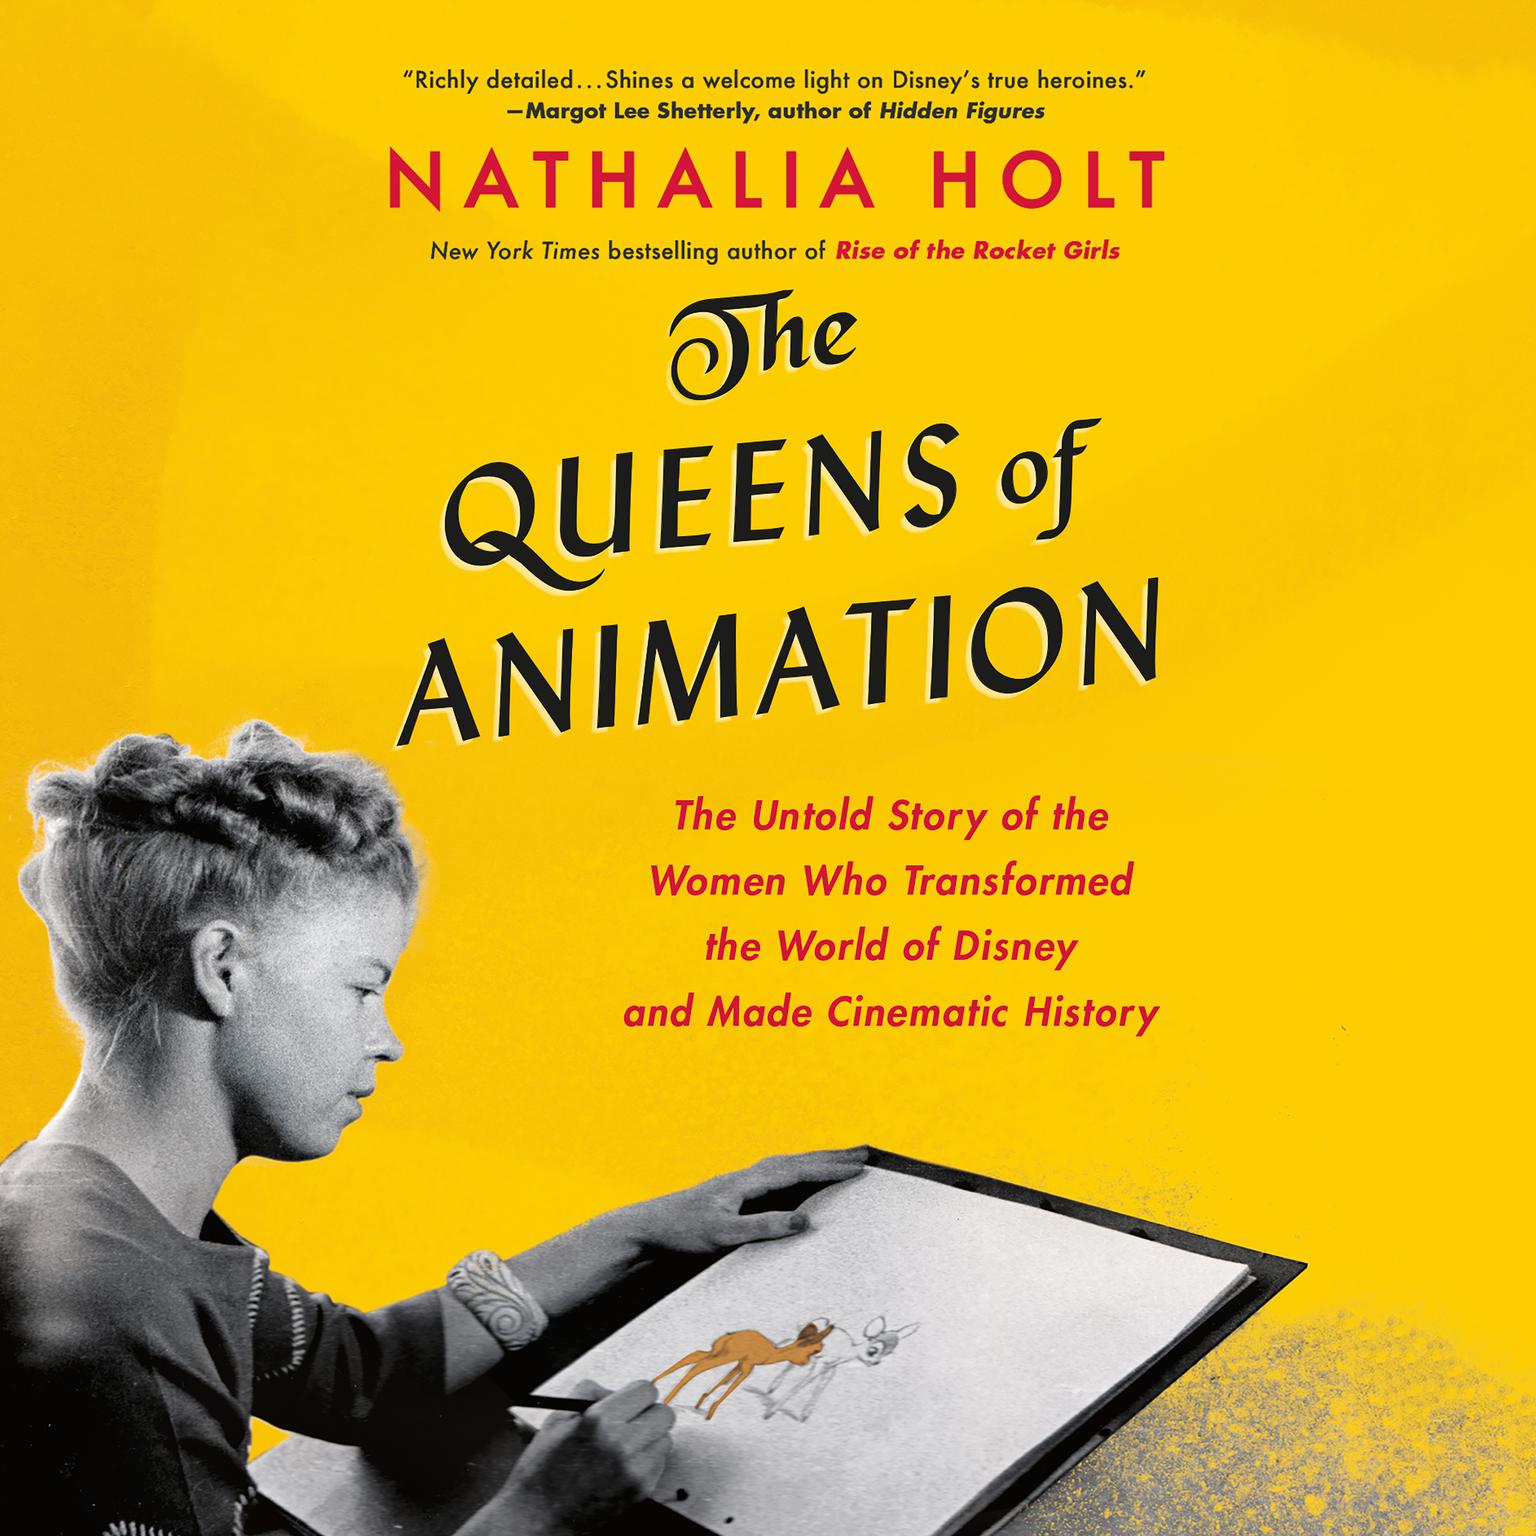 The Queens of Animation: The Untold Story of the Women Who Transformed the World of Disney and Made Cinematic History Audiobook, by Nathalia Holt